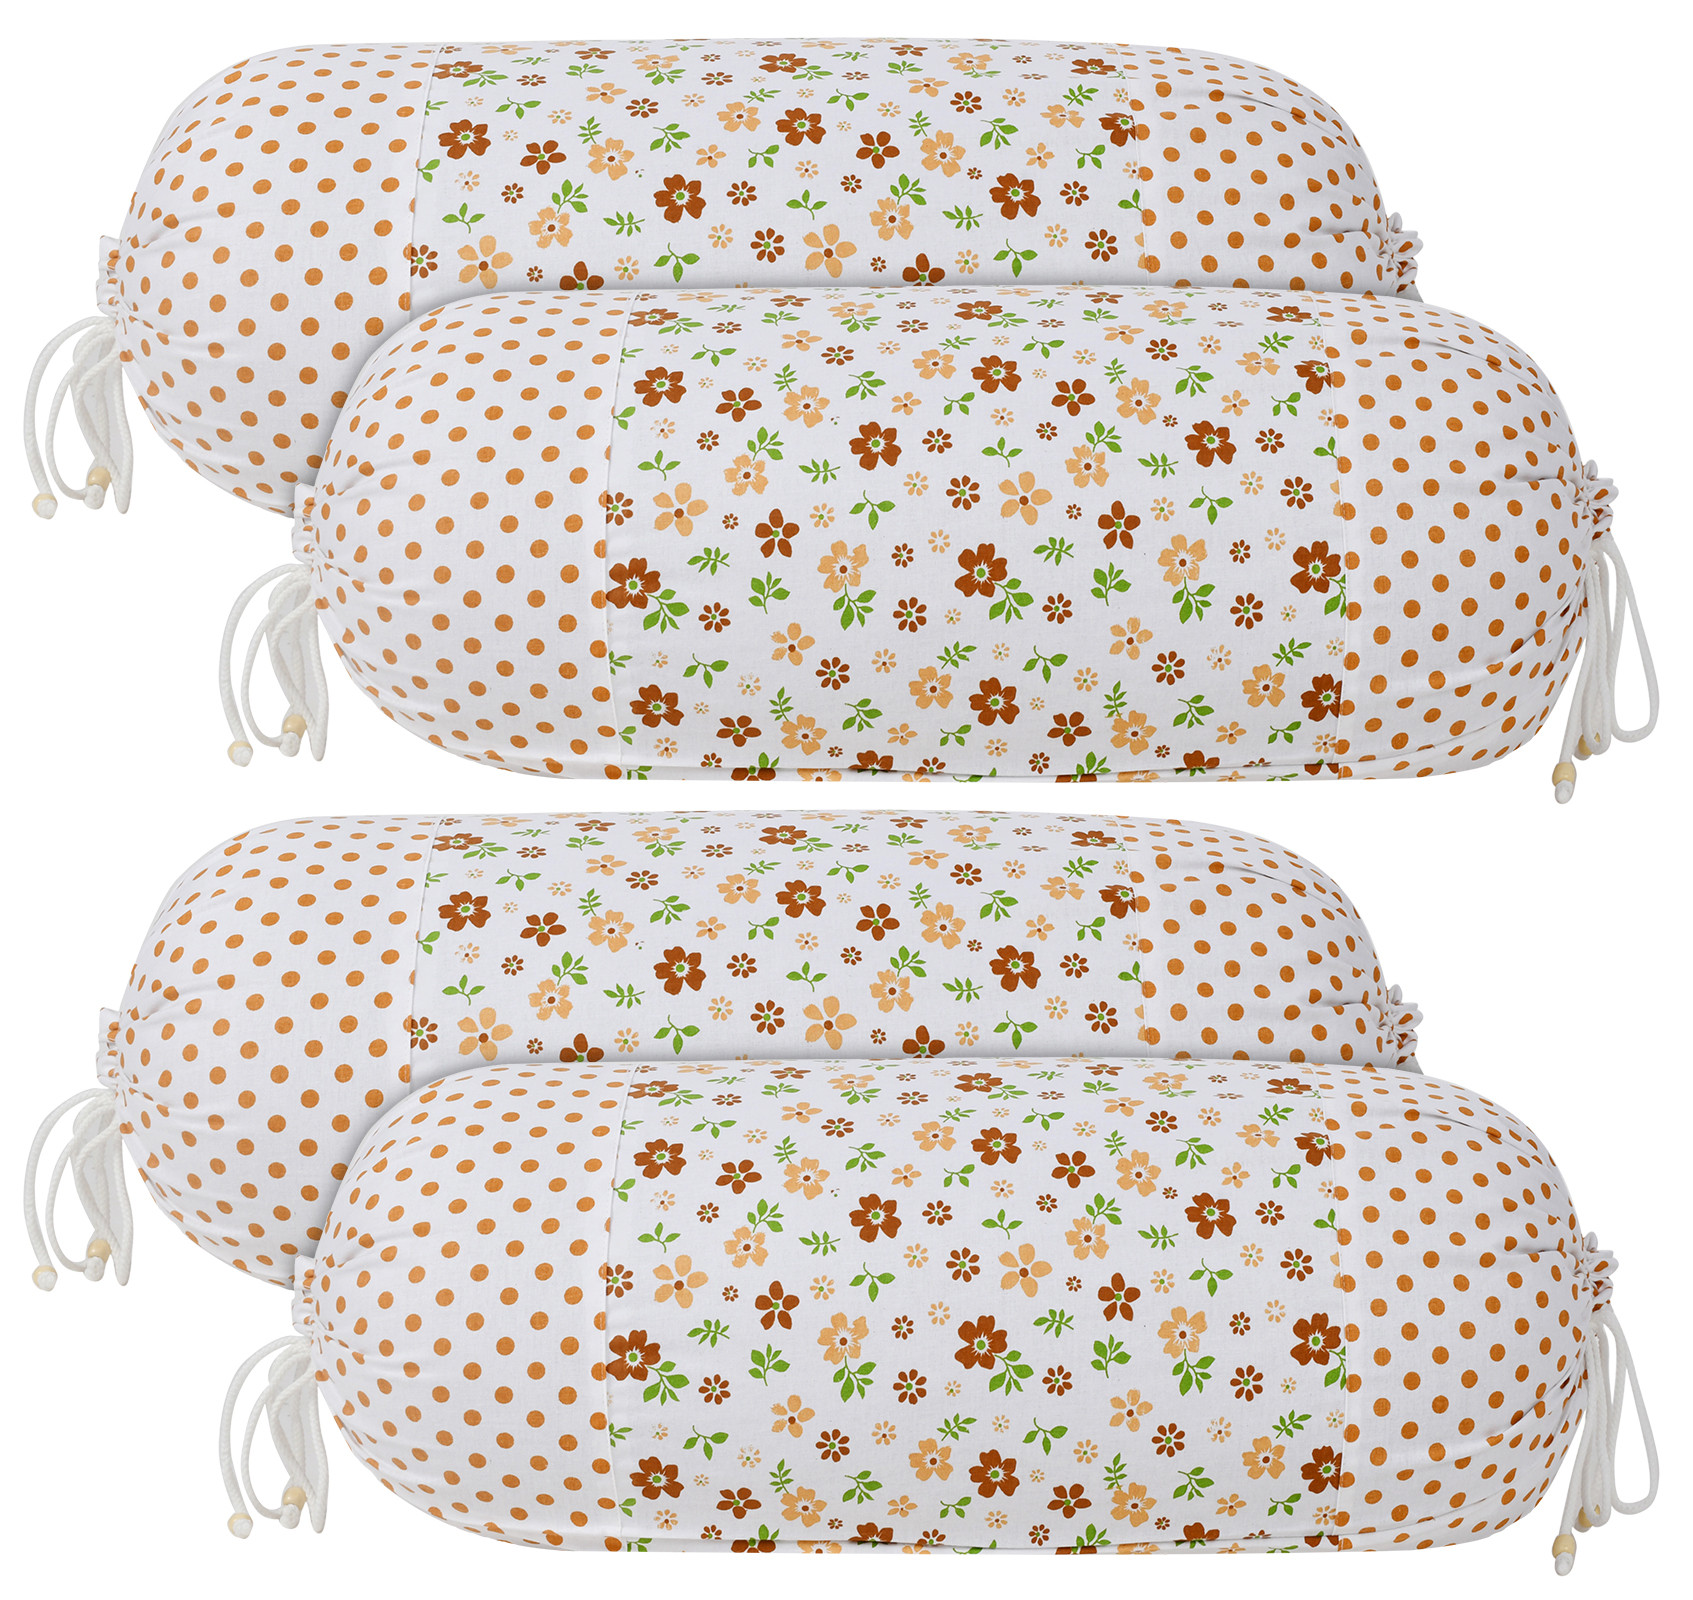 Kuber Industries Flower Printed Cotton Bolster Cover- 16